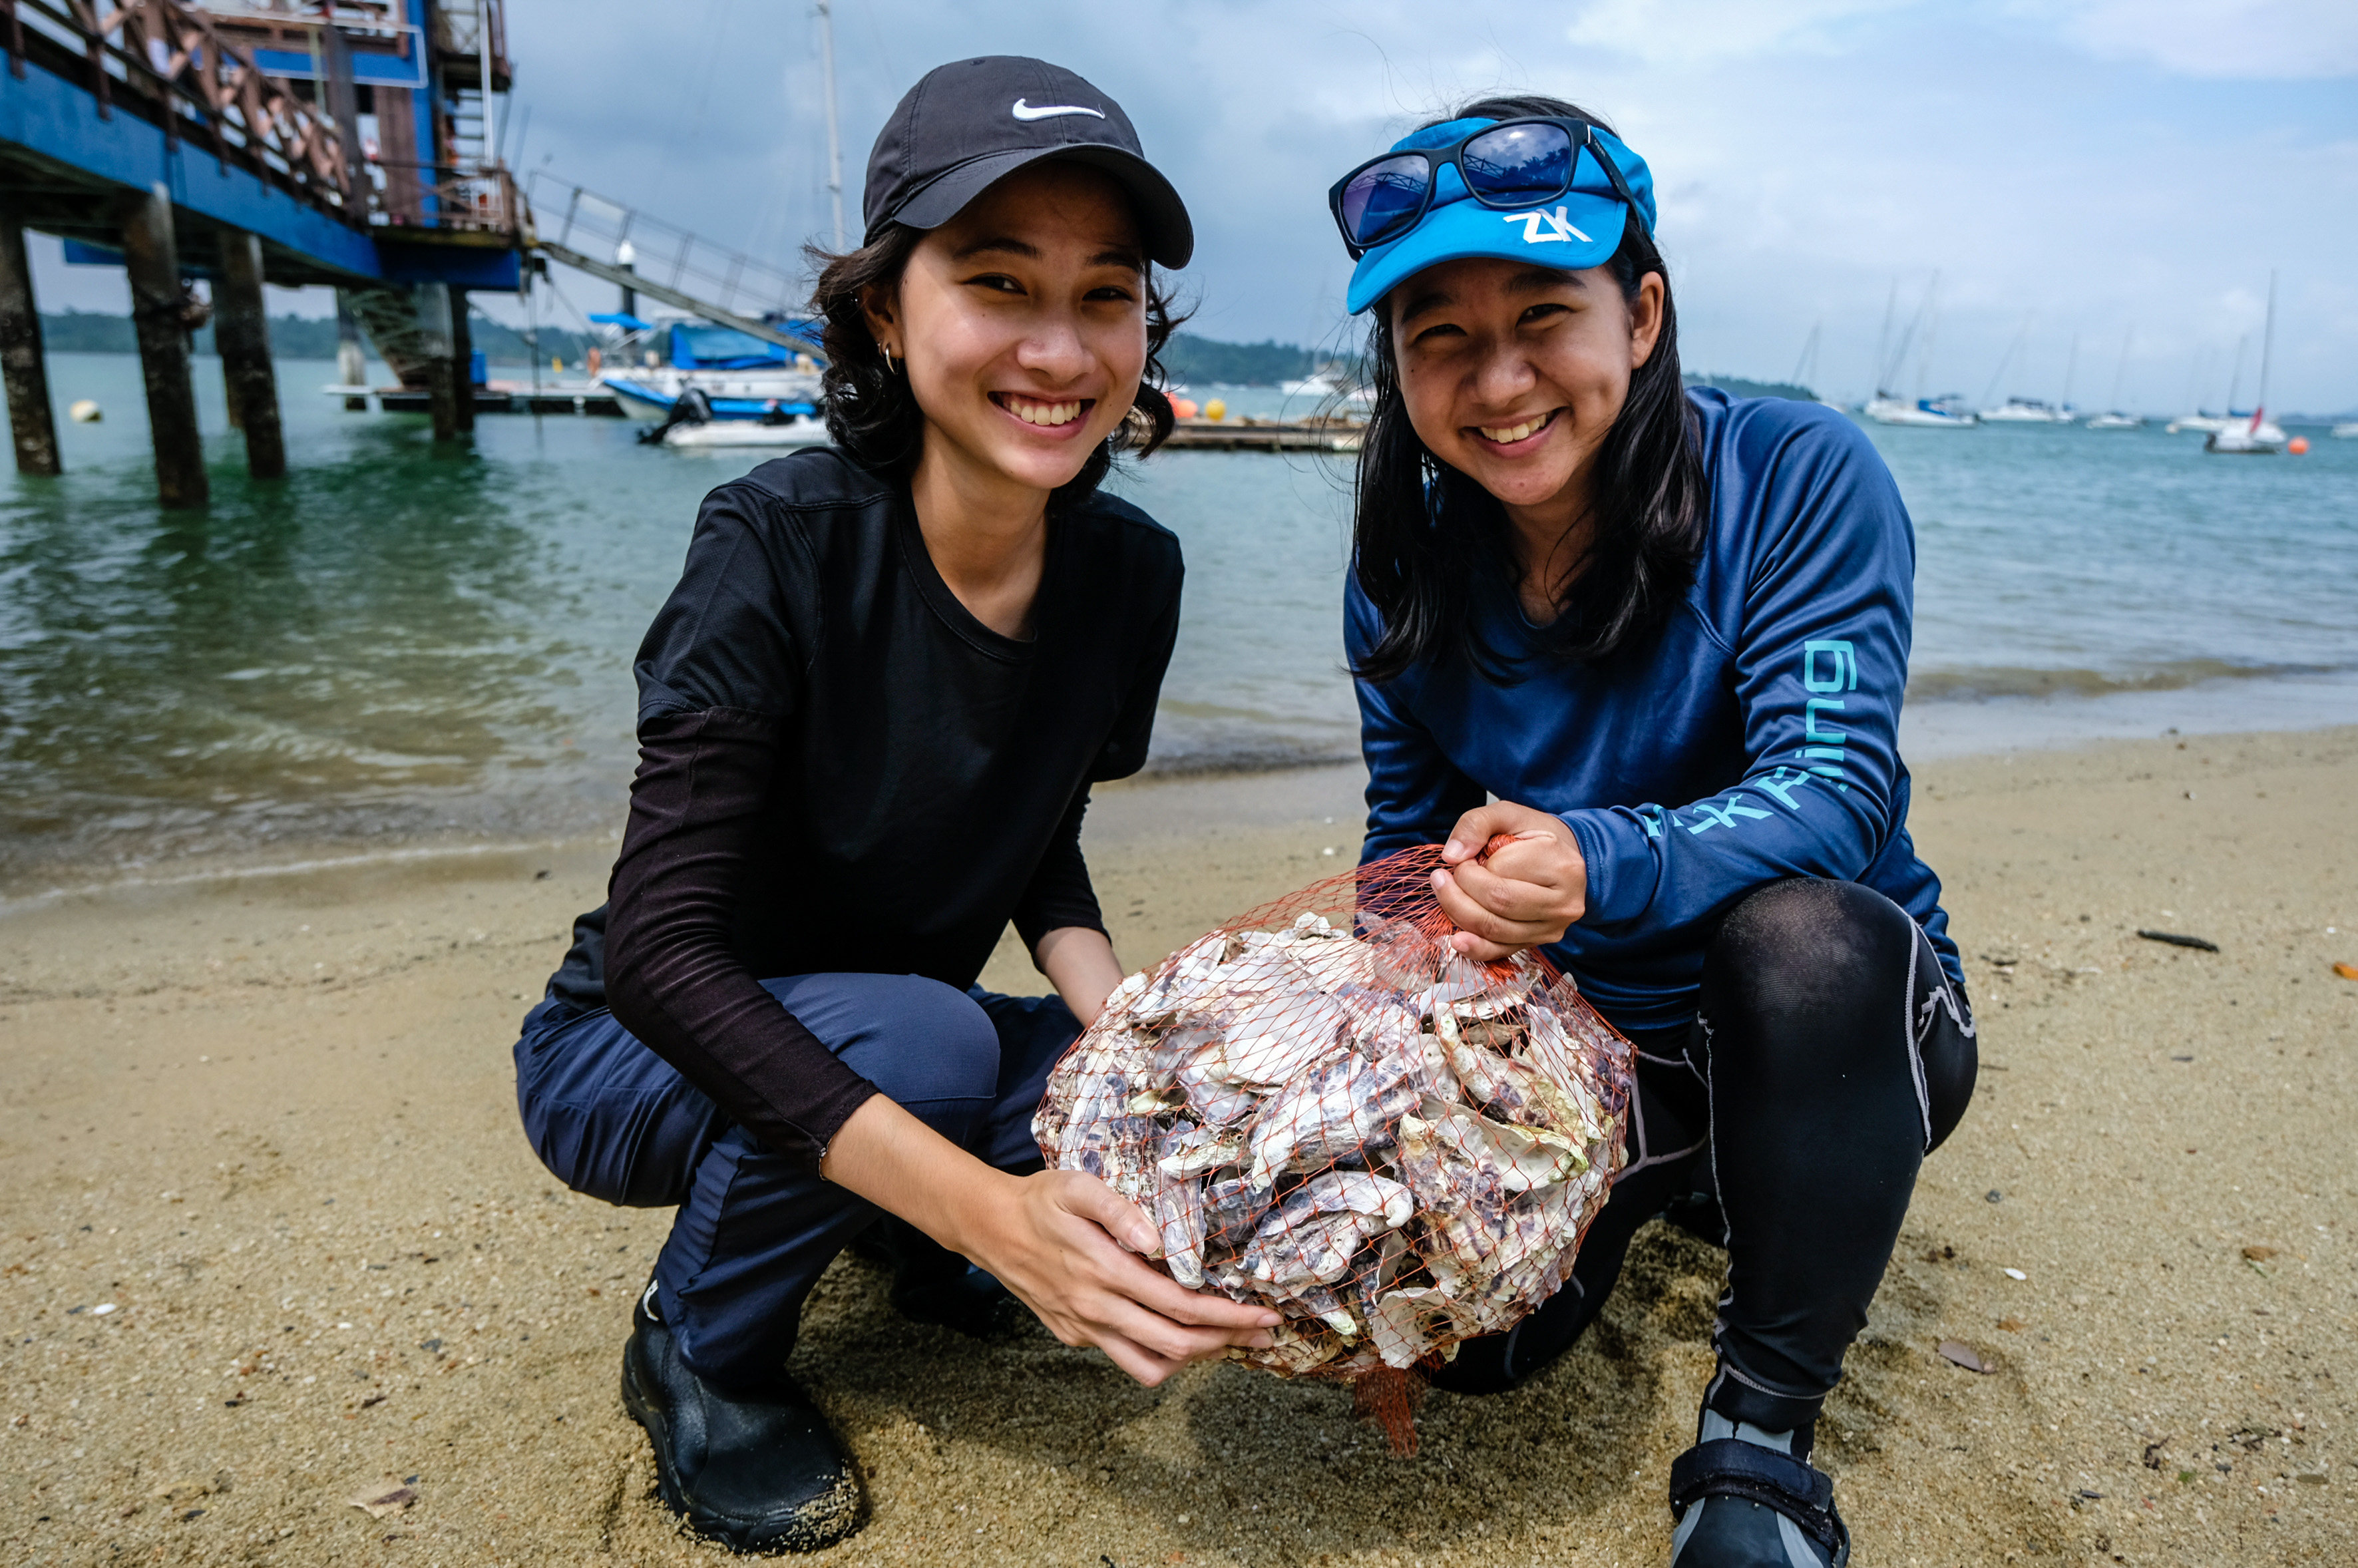 Ecologists Erika Ng (left) and Yukie Yokoyama with a reef bag of oyster shells at Changi Sailing Club. Photo: Toh Ee Ming